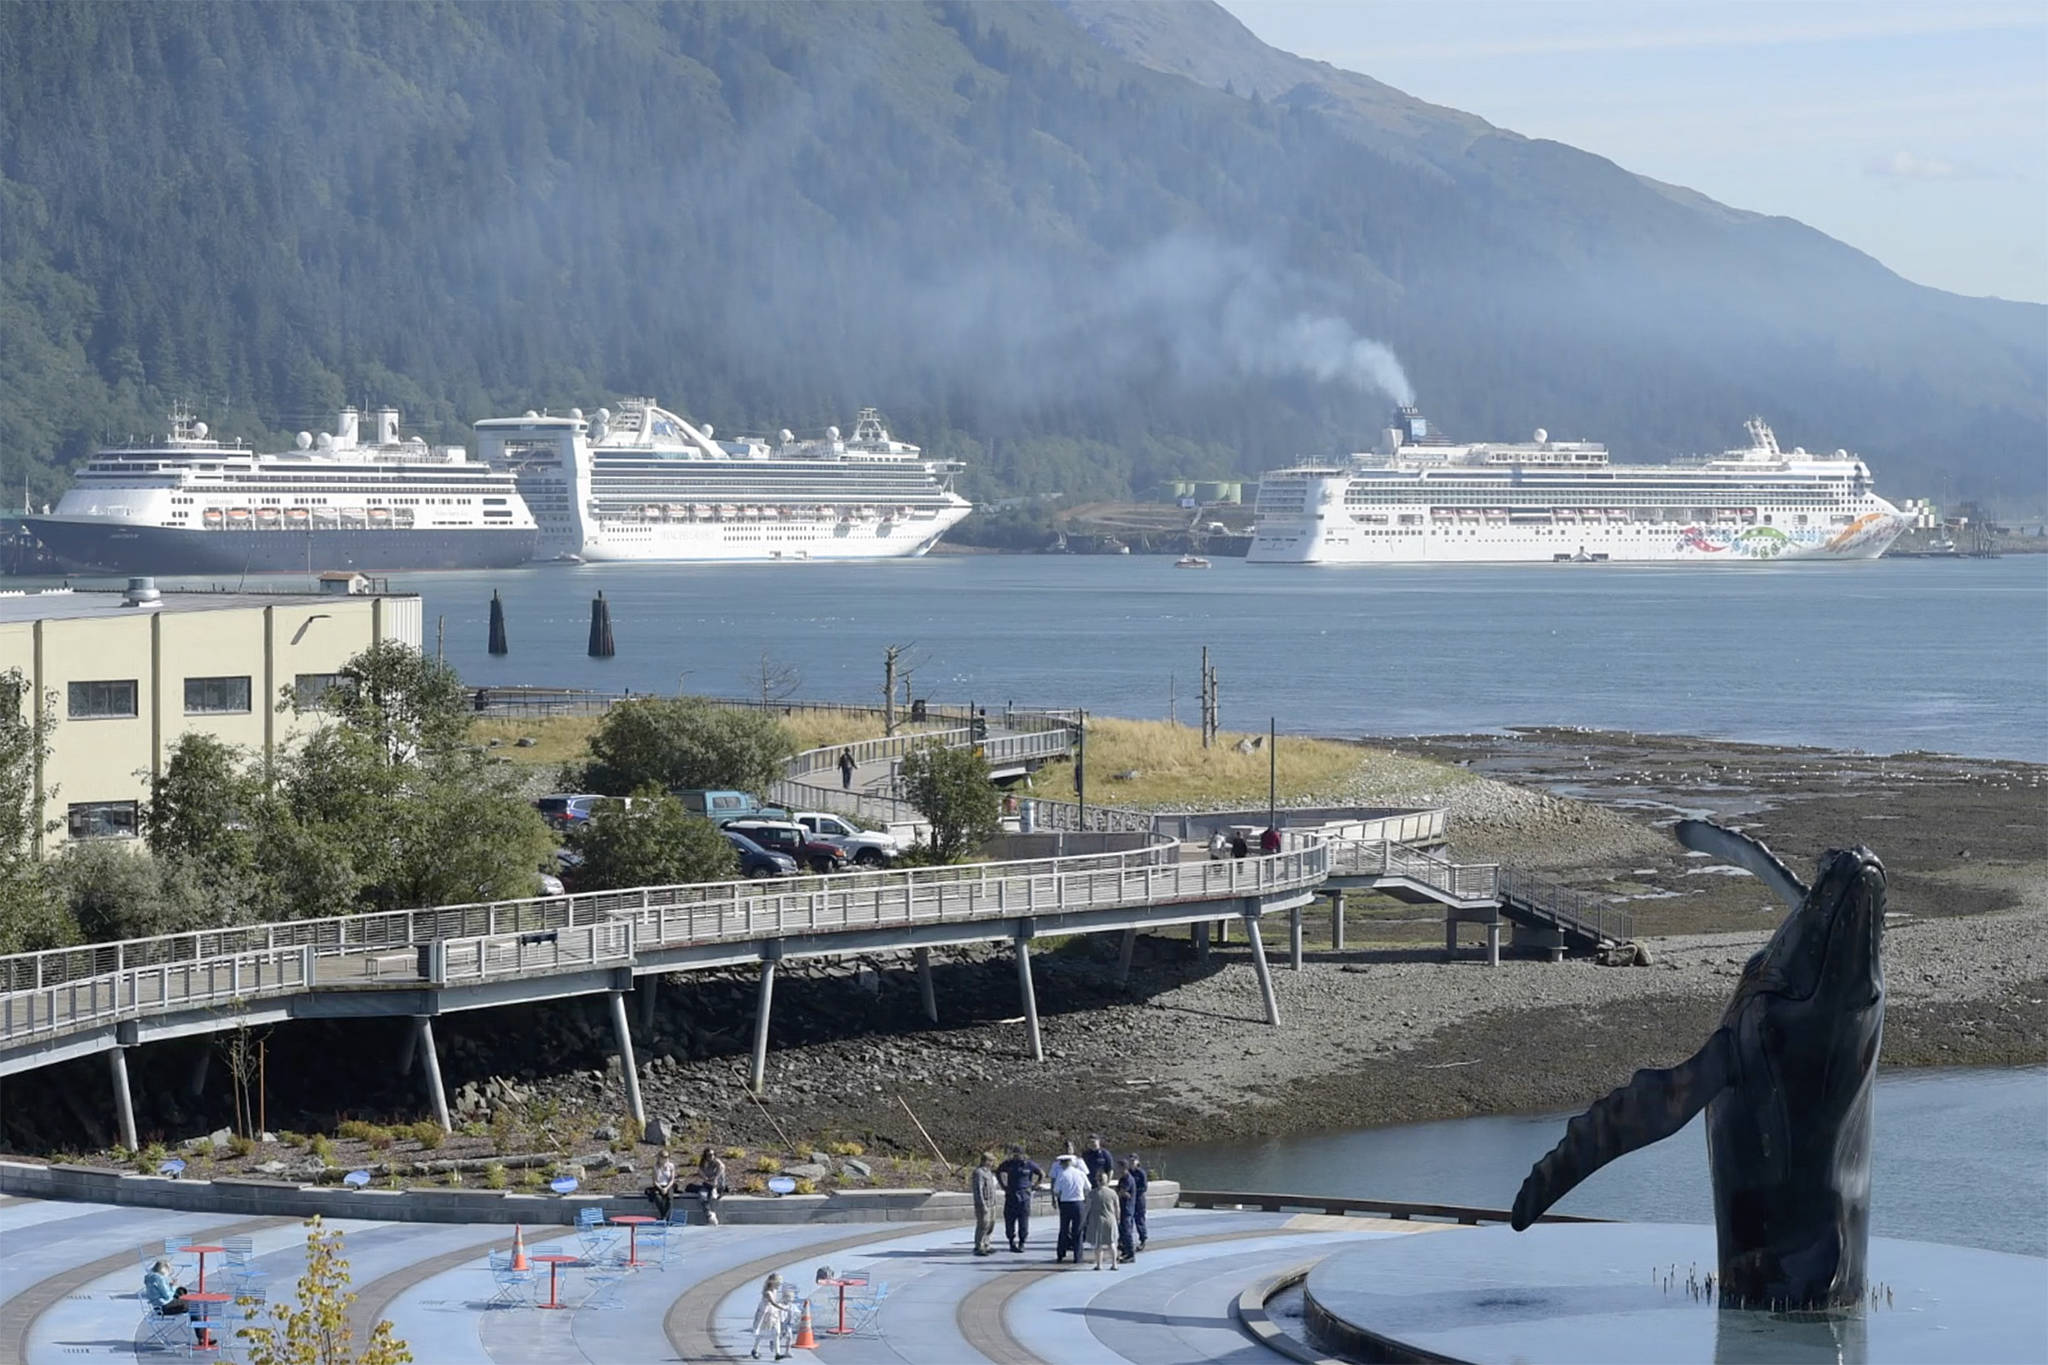 City leaders are waiting to learn more about the City and Borough of Juneau’s protocols that allow cruise ships to resume sailing. The Norwegian Pearl cruise ship, right, pulls into the AJ Dock in Juneau in September 2018. (Michael Penn | Juneau Empire)